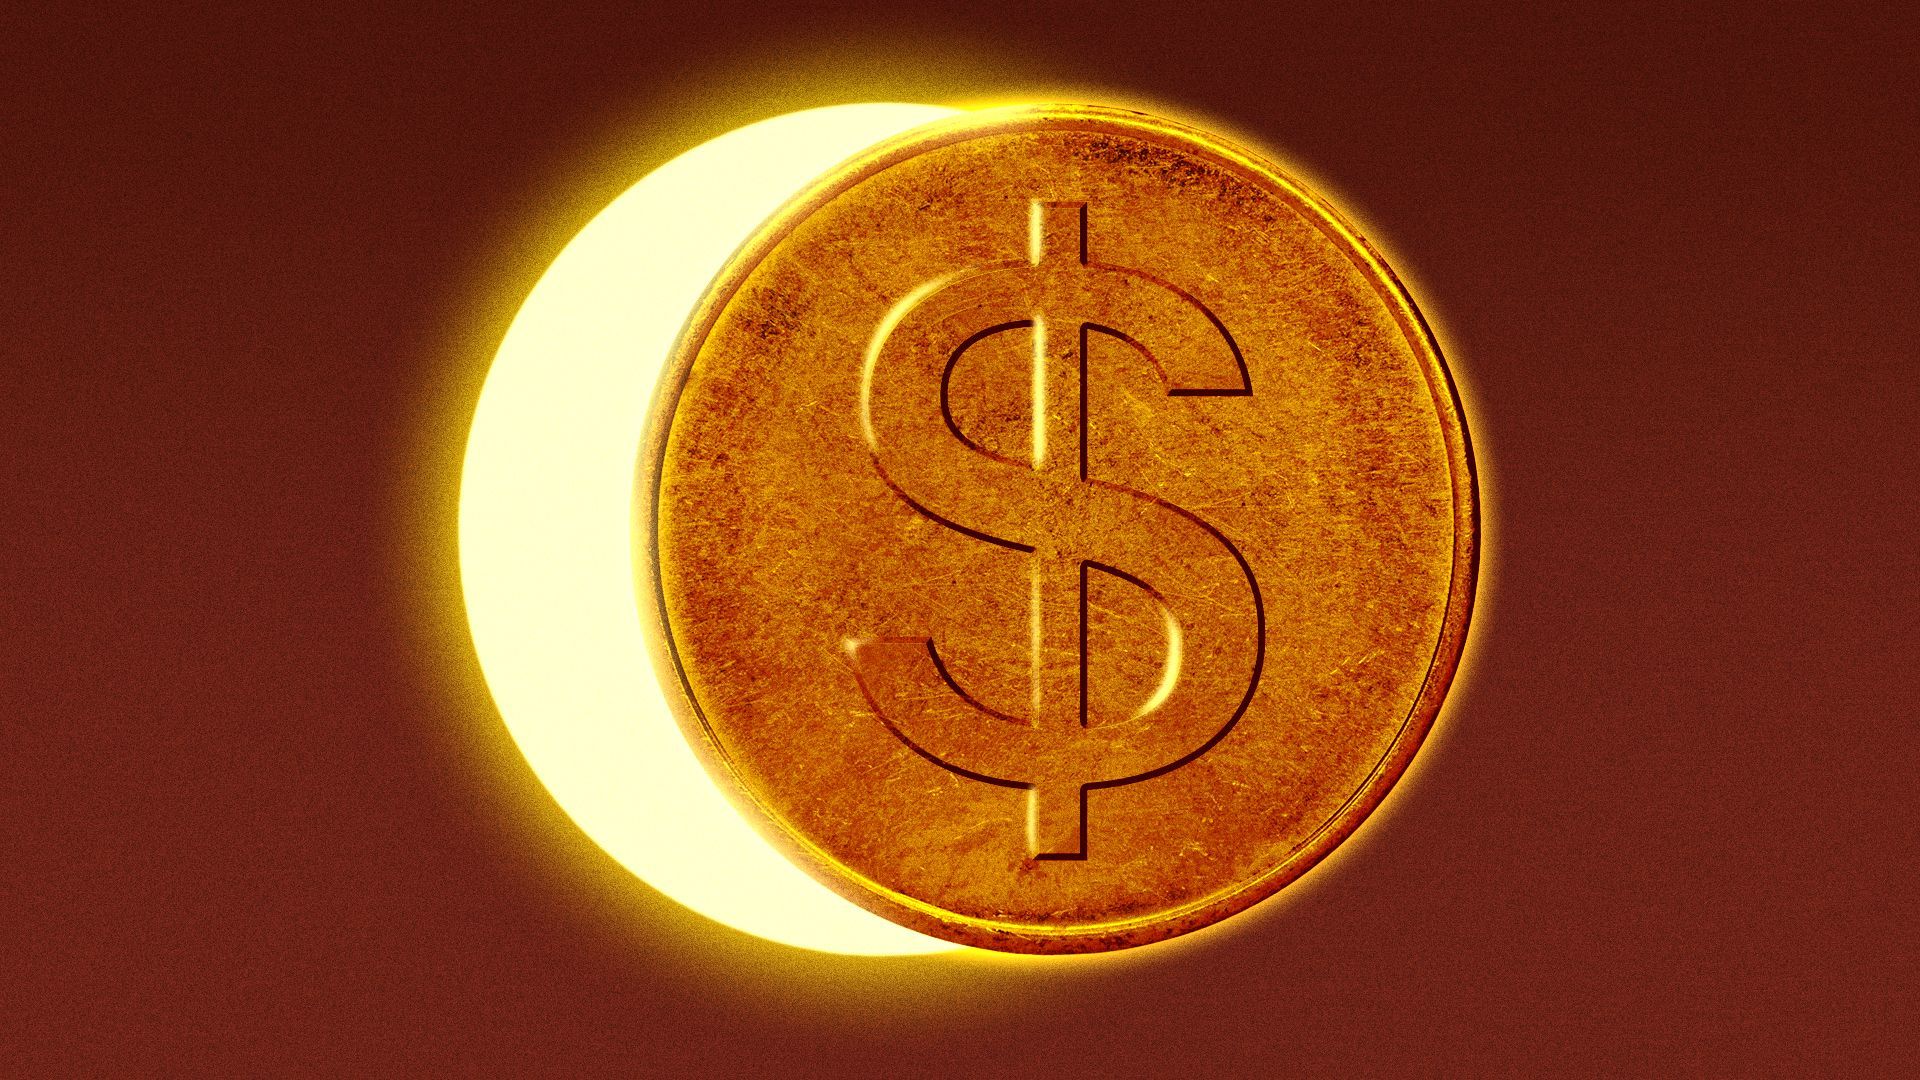 Illustration of a giant coin blocking out the sun.